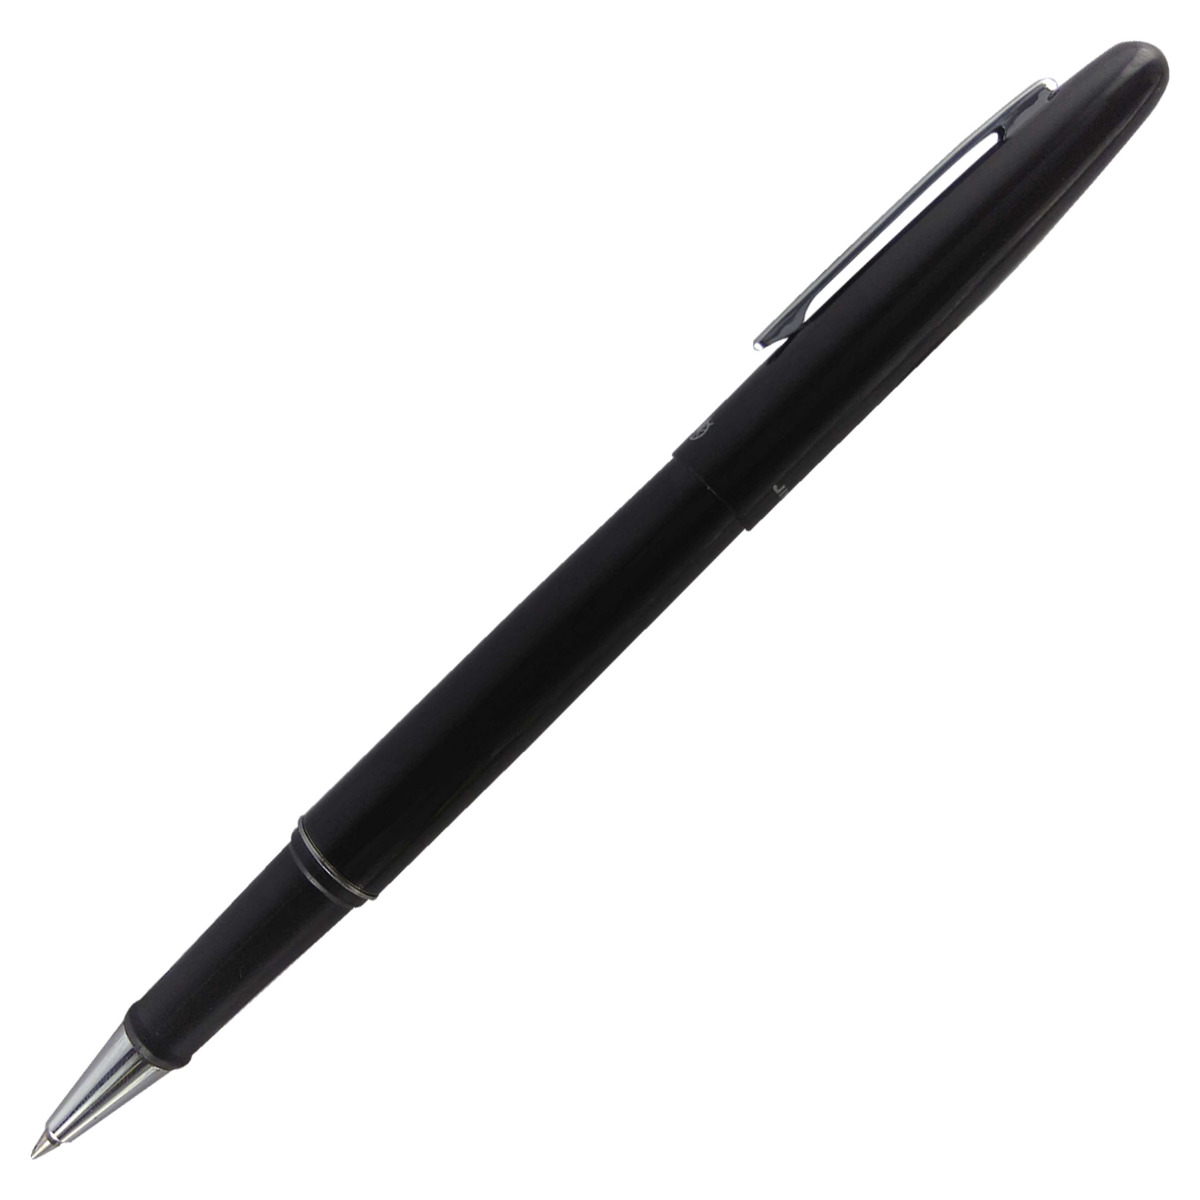 Jinhao  - Slim Glossy Black Body With Silver Clip Roller Ball Model No 13117